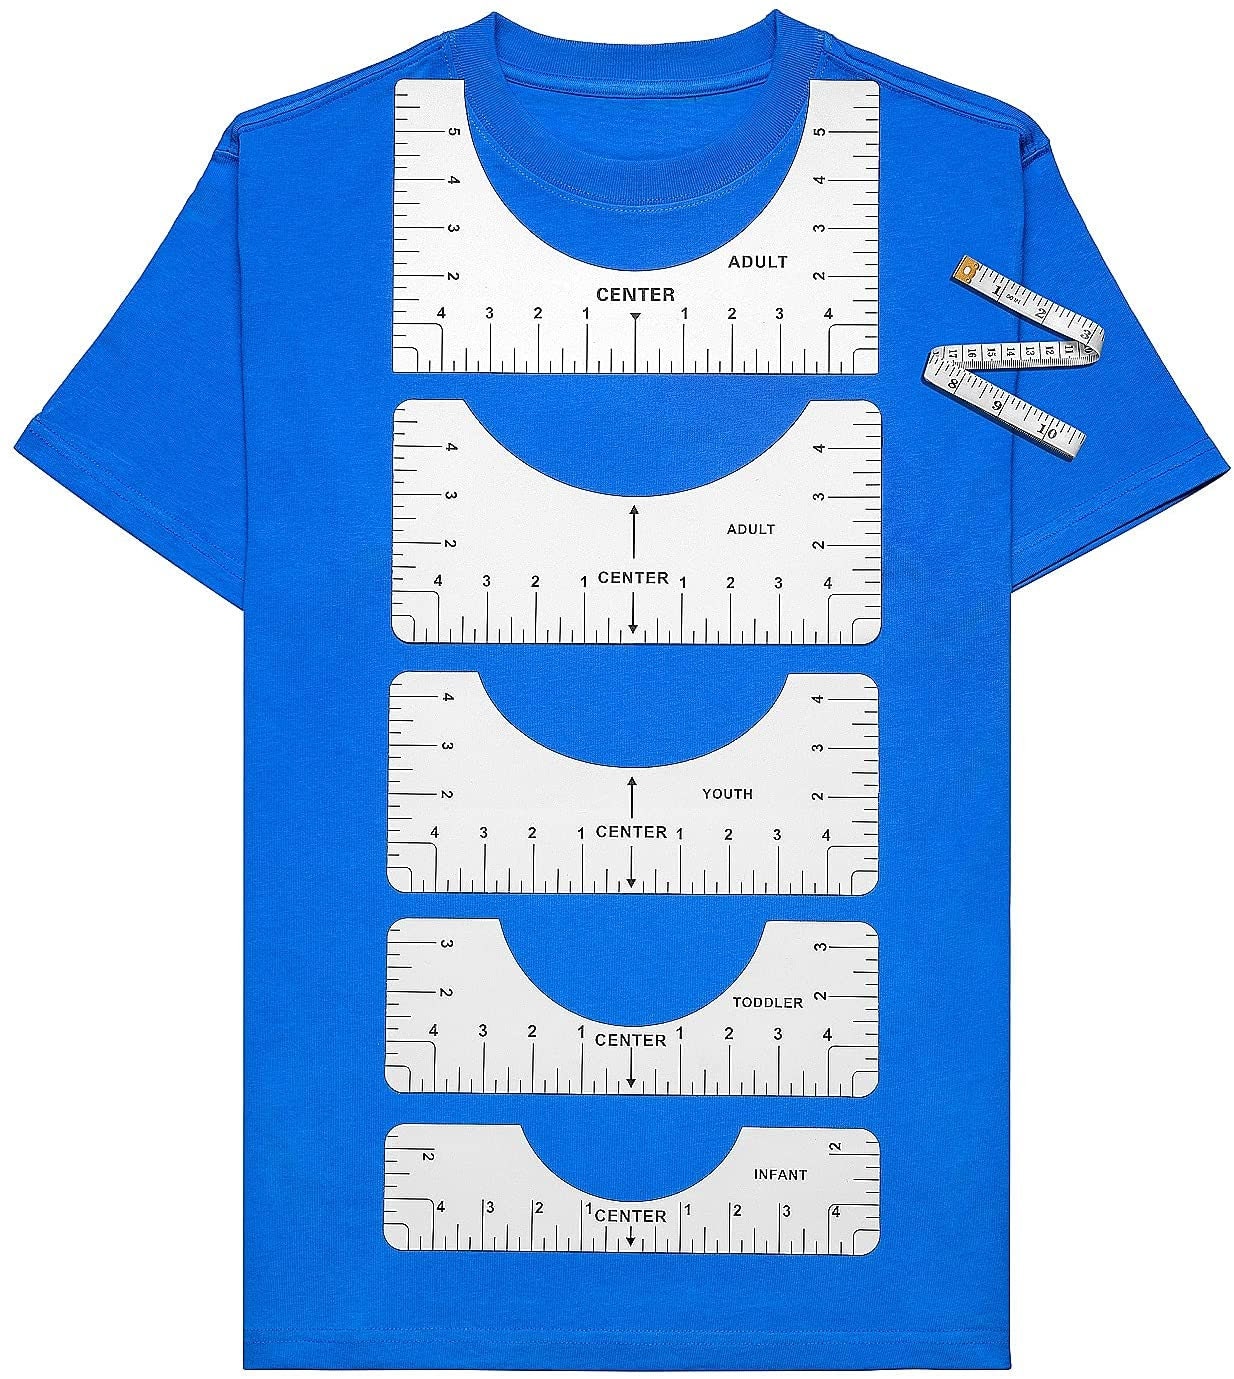 Tshirt Ruler Guide for Vinyl Alignment, Tshirt Rulers to Center Designs, Alignment Tool with Soft Tape Measure,Pencil, Size: One size, 1 Pack